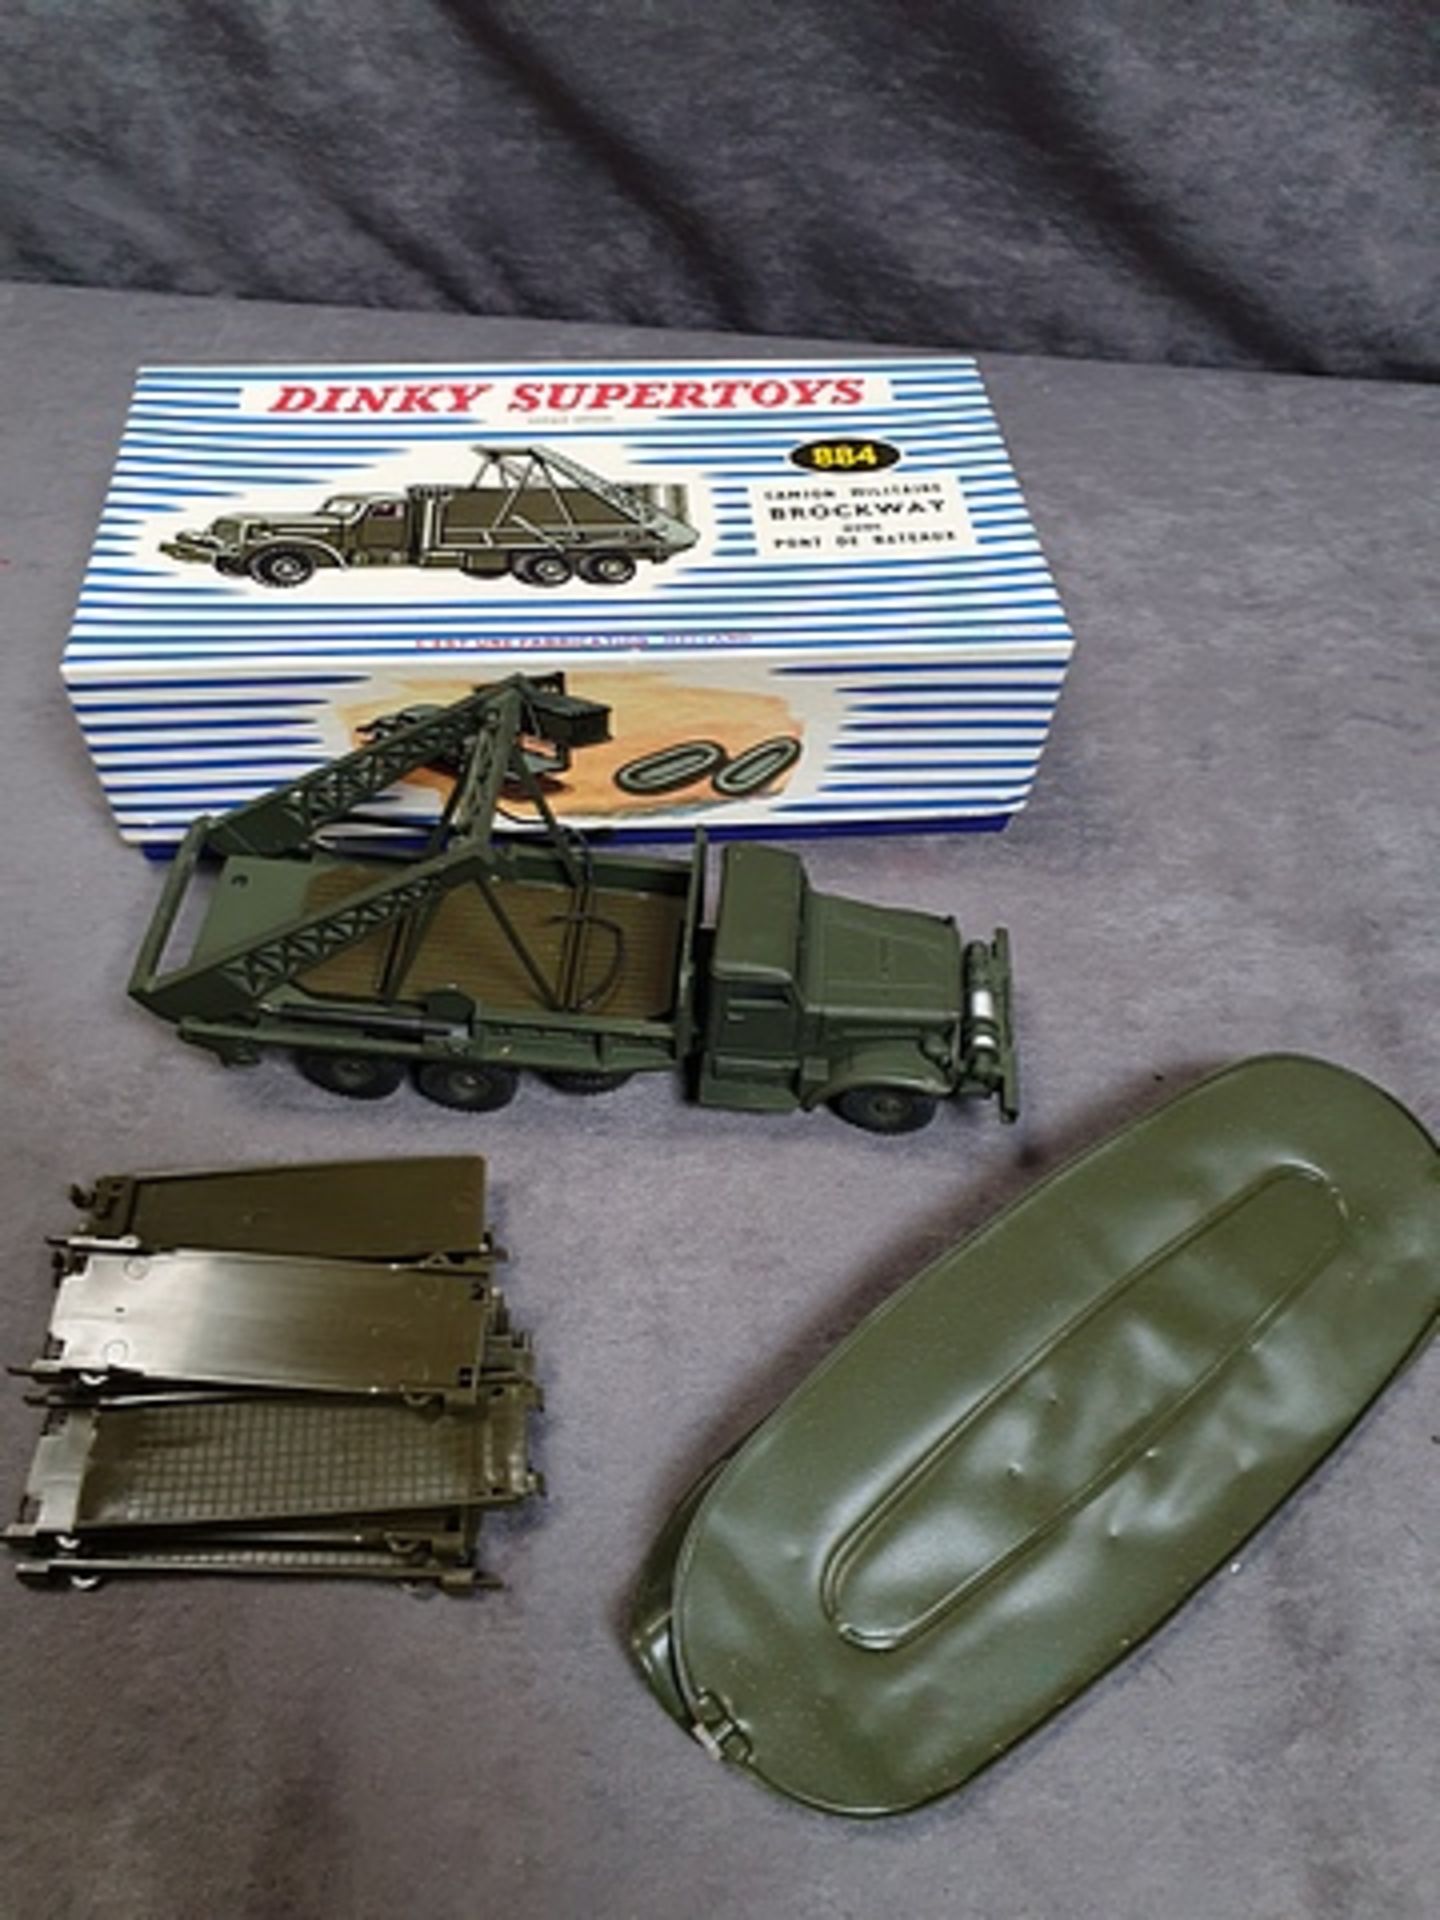 Dinky Diecast Toys # 884 French Brockway Military Truck With Bridge Of Boats in a crisp Box